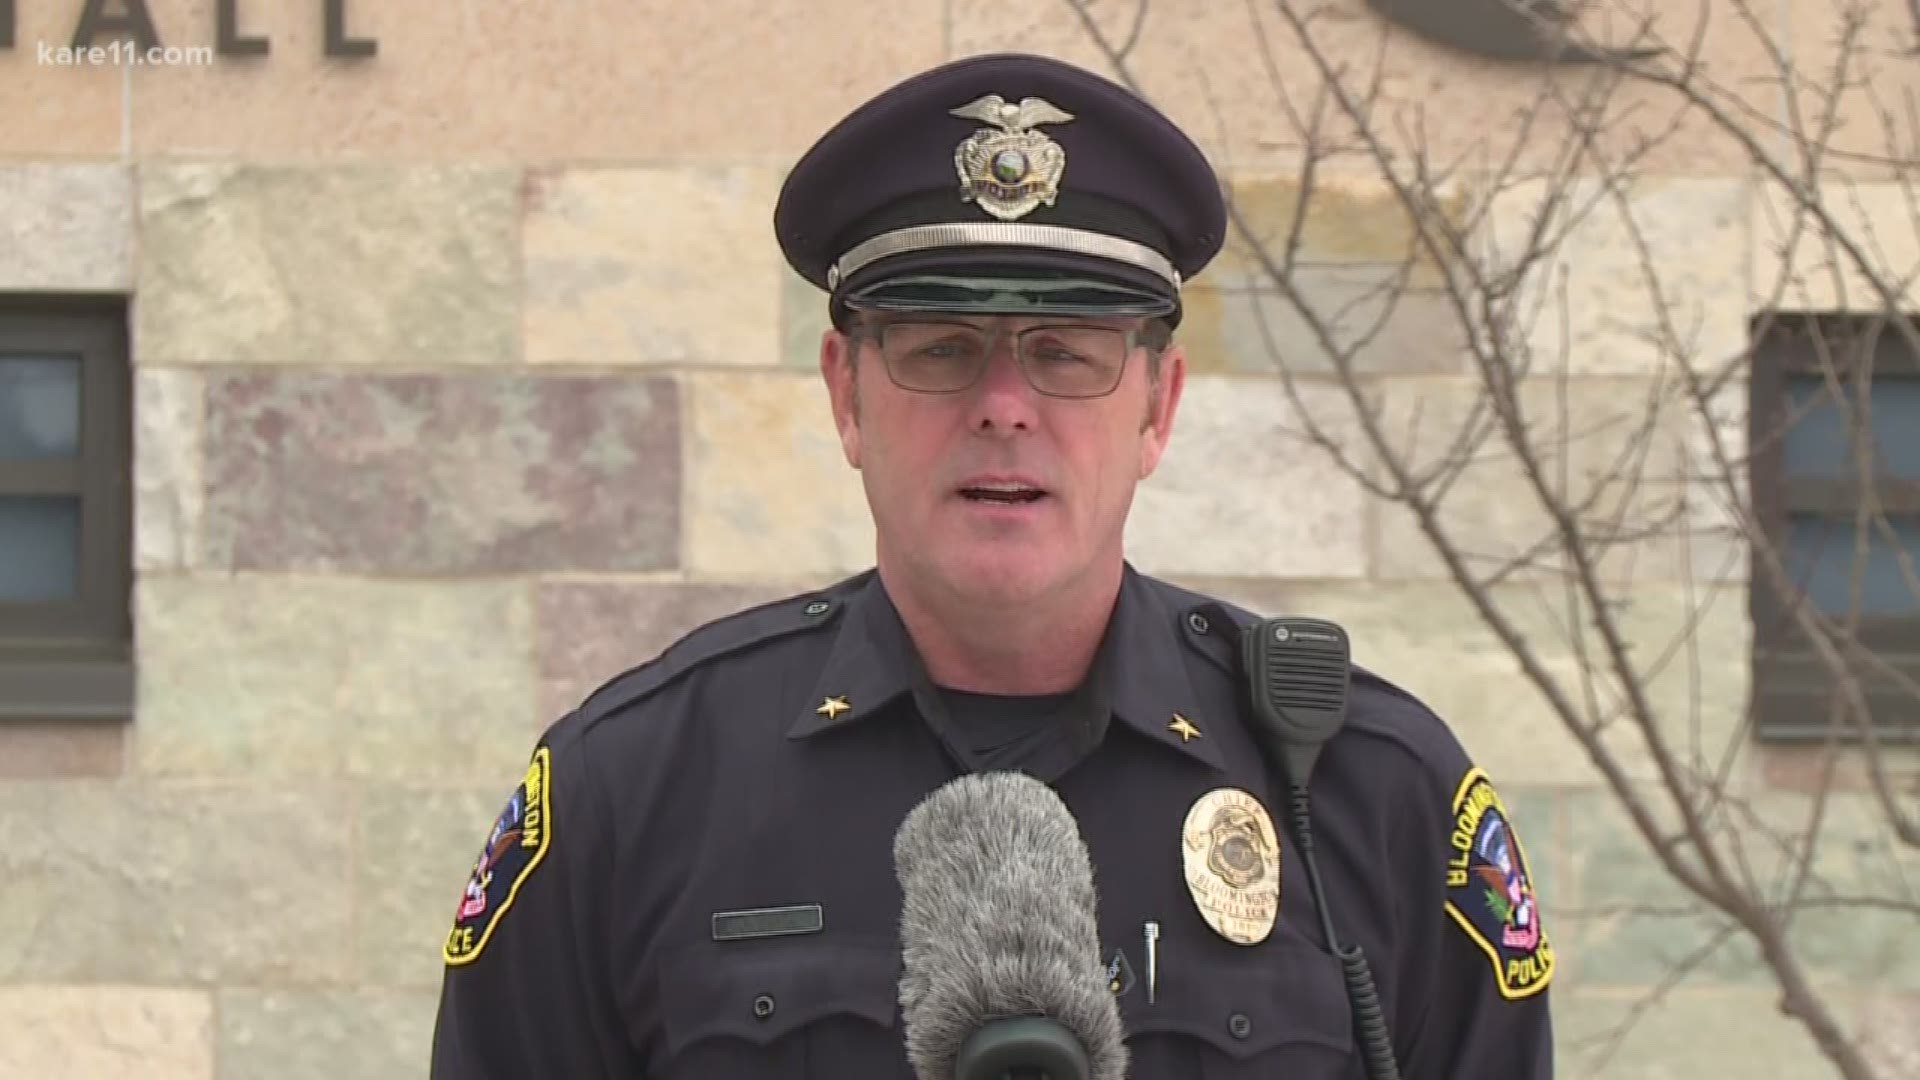 Bloomington Police Chief Jeff Potts held a press conference Saturday at noon stating the 5-year-old child "is still alive."